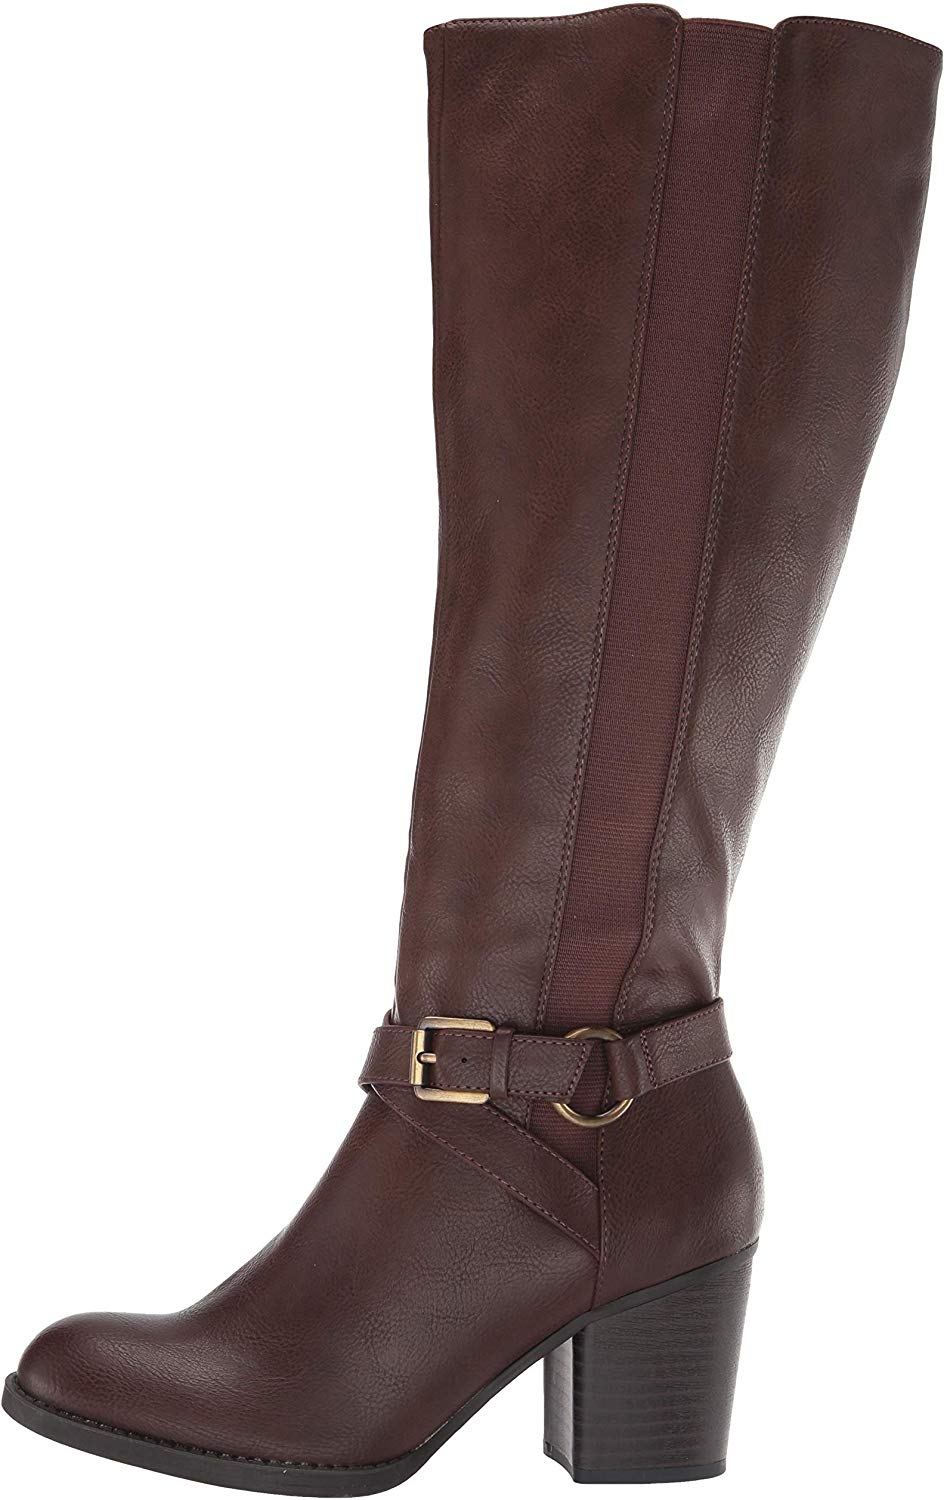 SOUL Naturalizer Women's Timber Knee High Boot, Brown, Size 8.5 mcio | eBay